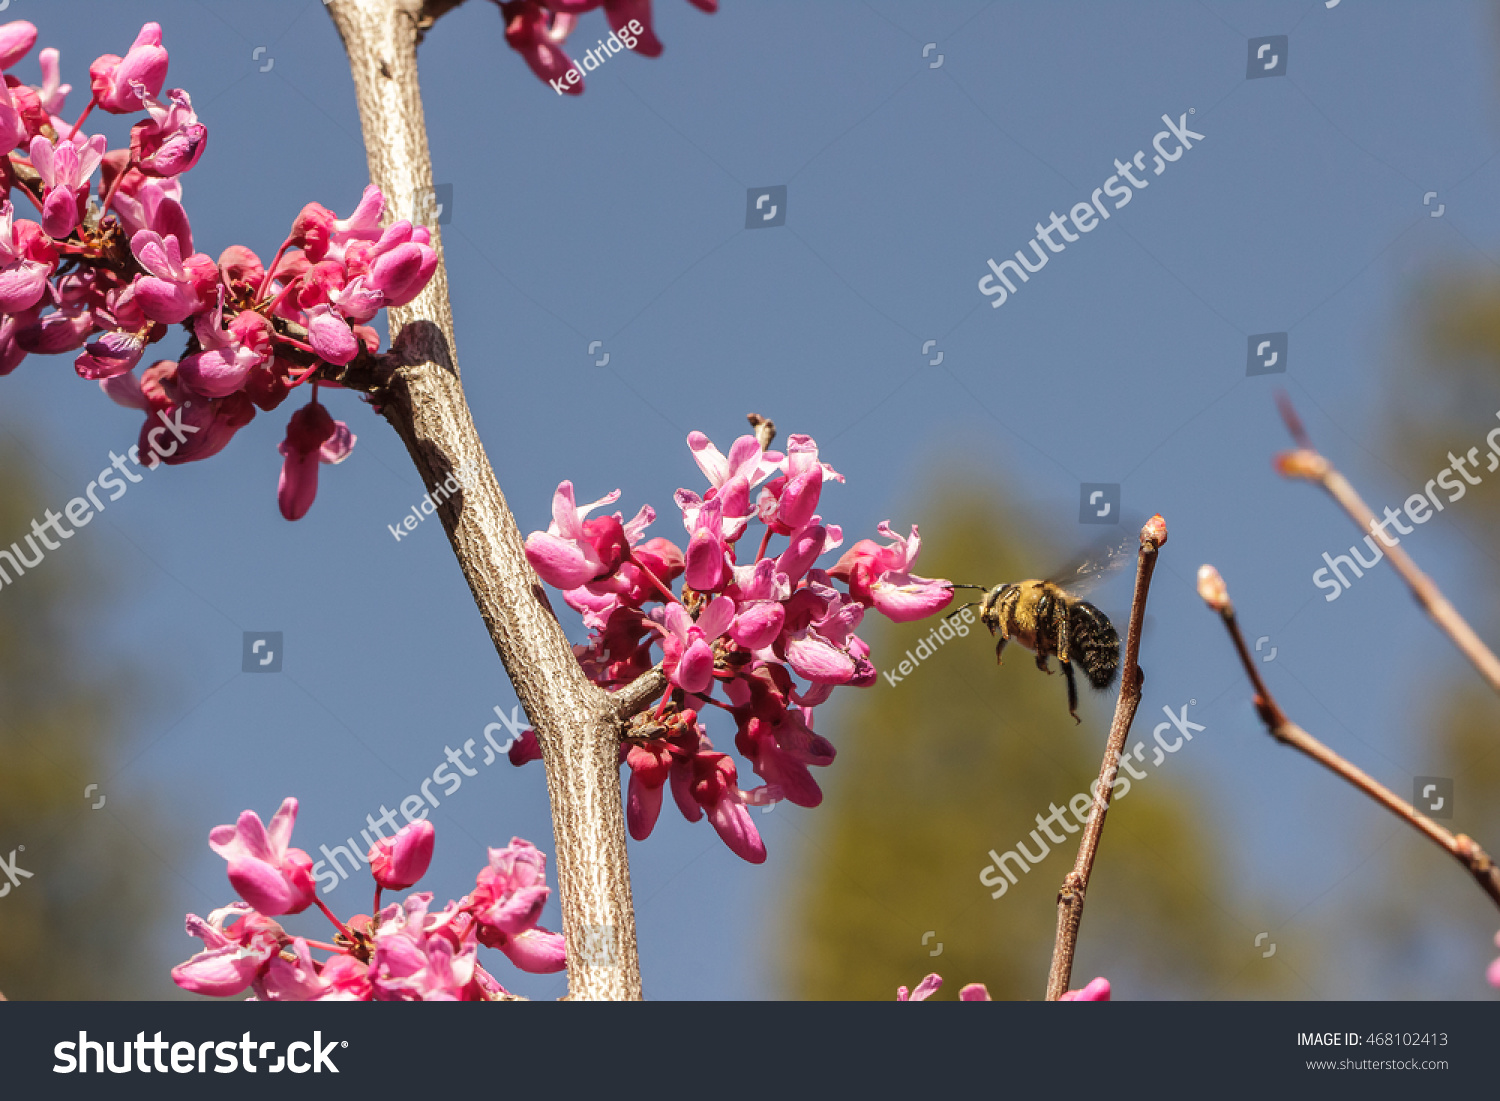 Carpenter bee (Xylocopa) hovering before a western redbud (Cercis occidentalis) flowering tree #468102413